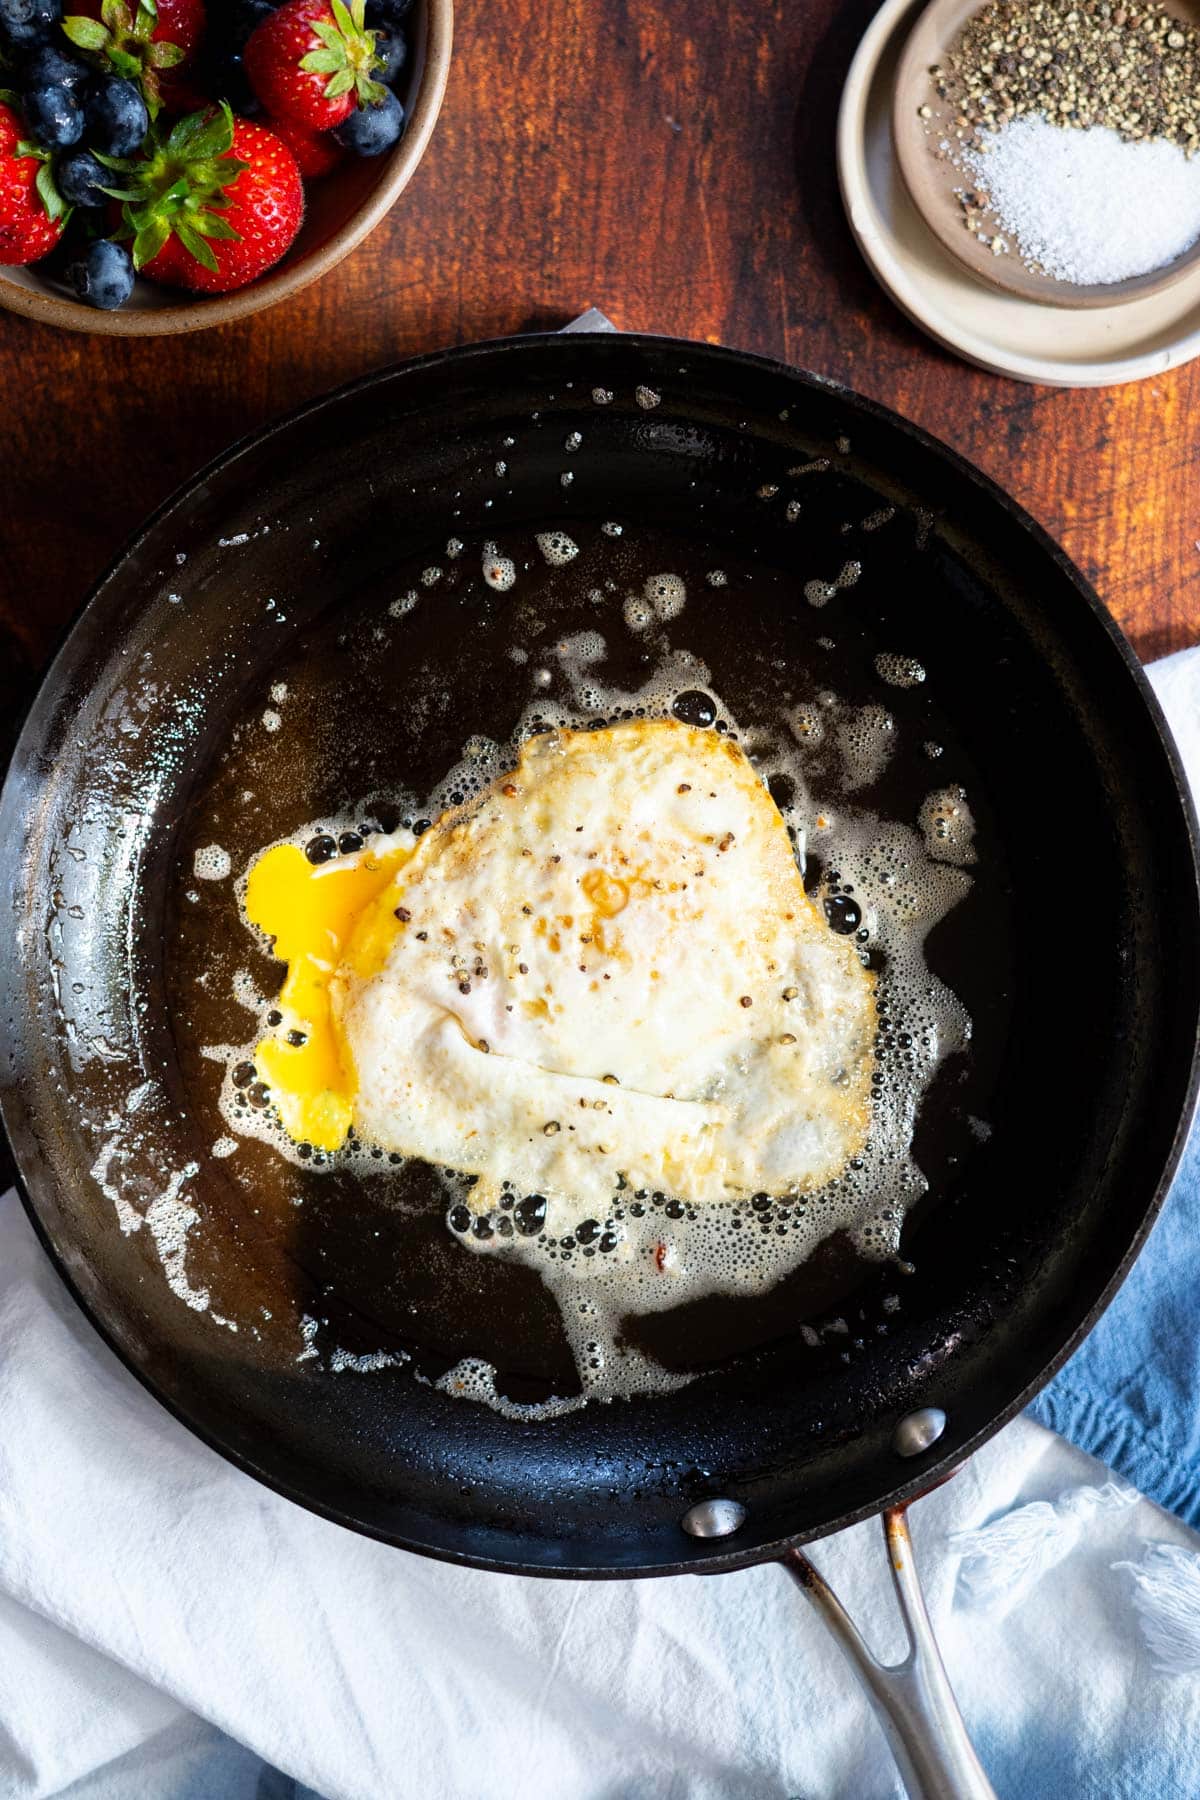 Fried egg with a broken yolk in a frying pan.